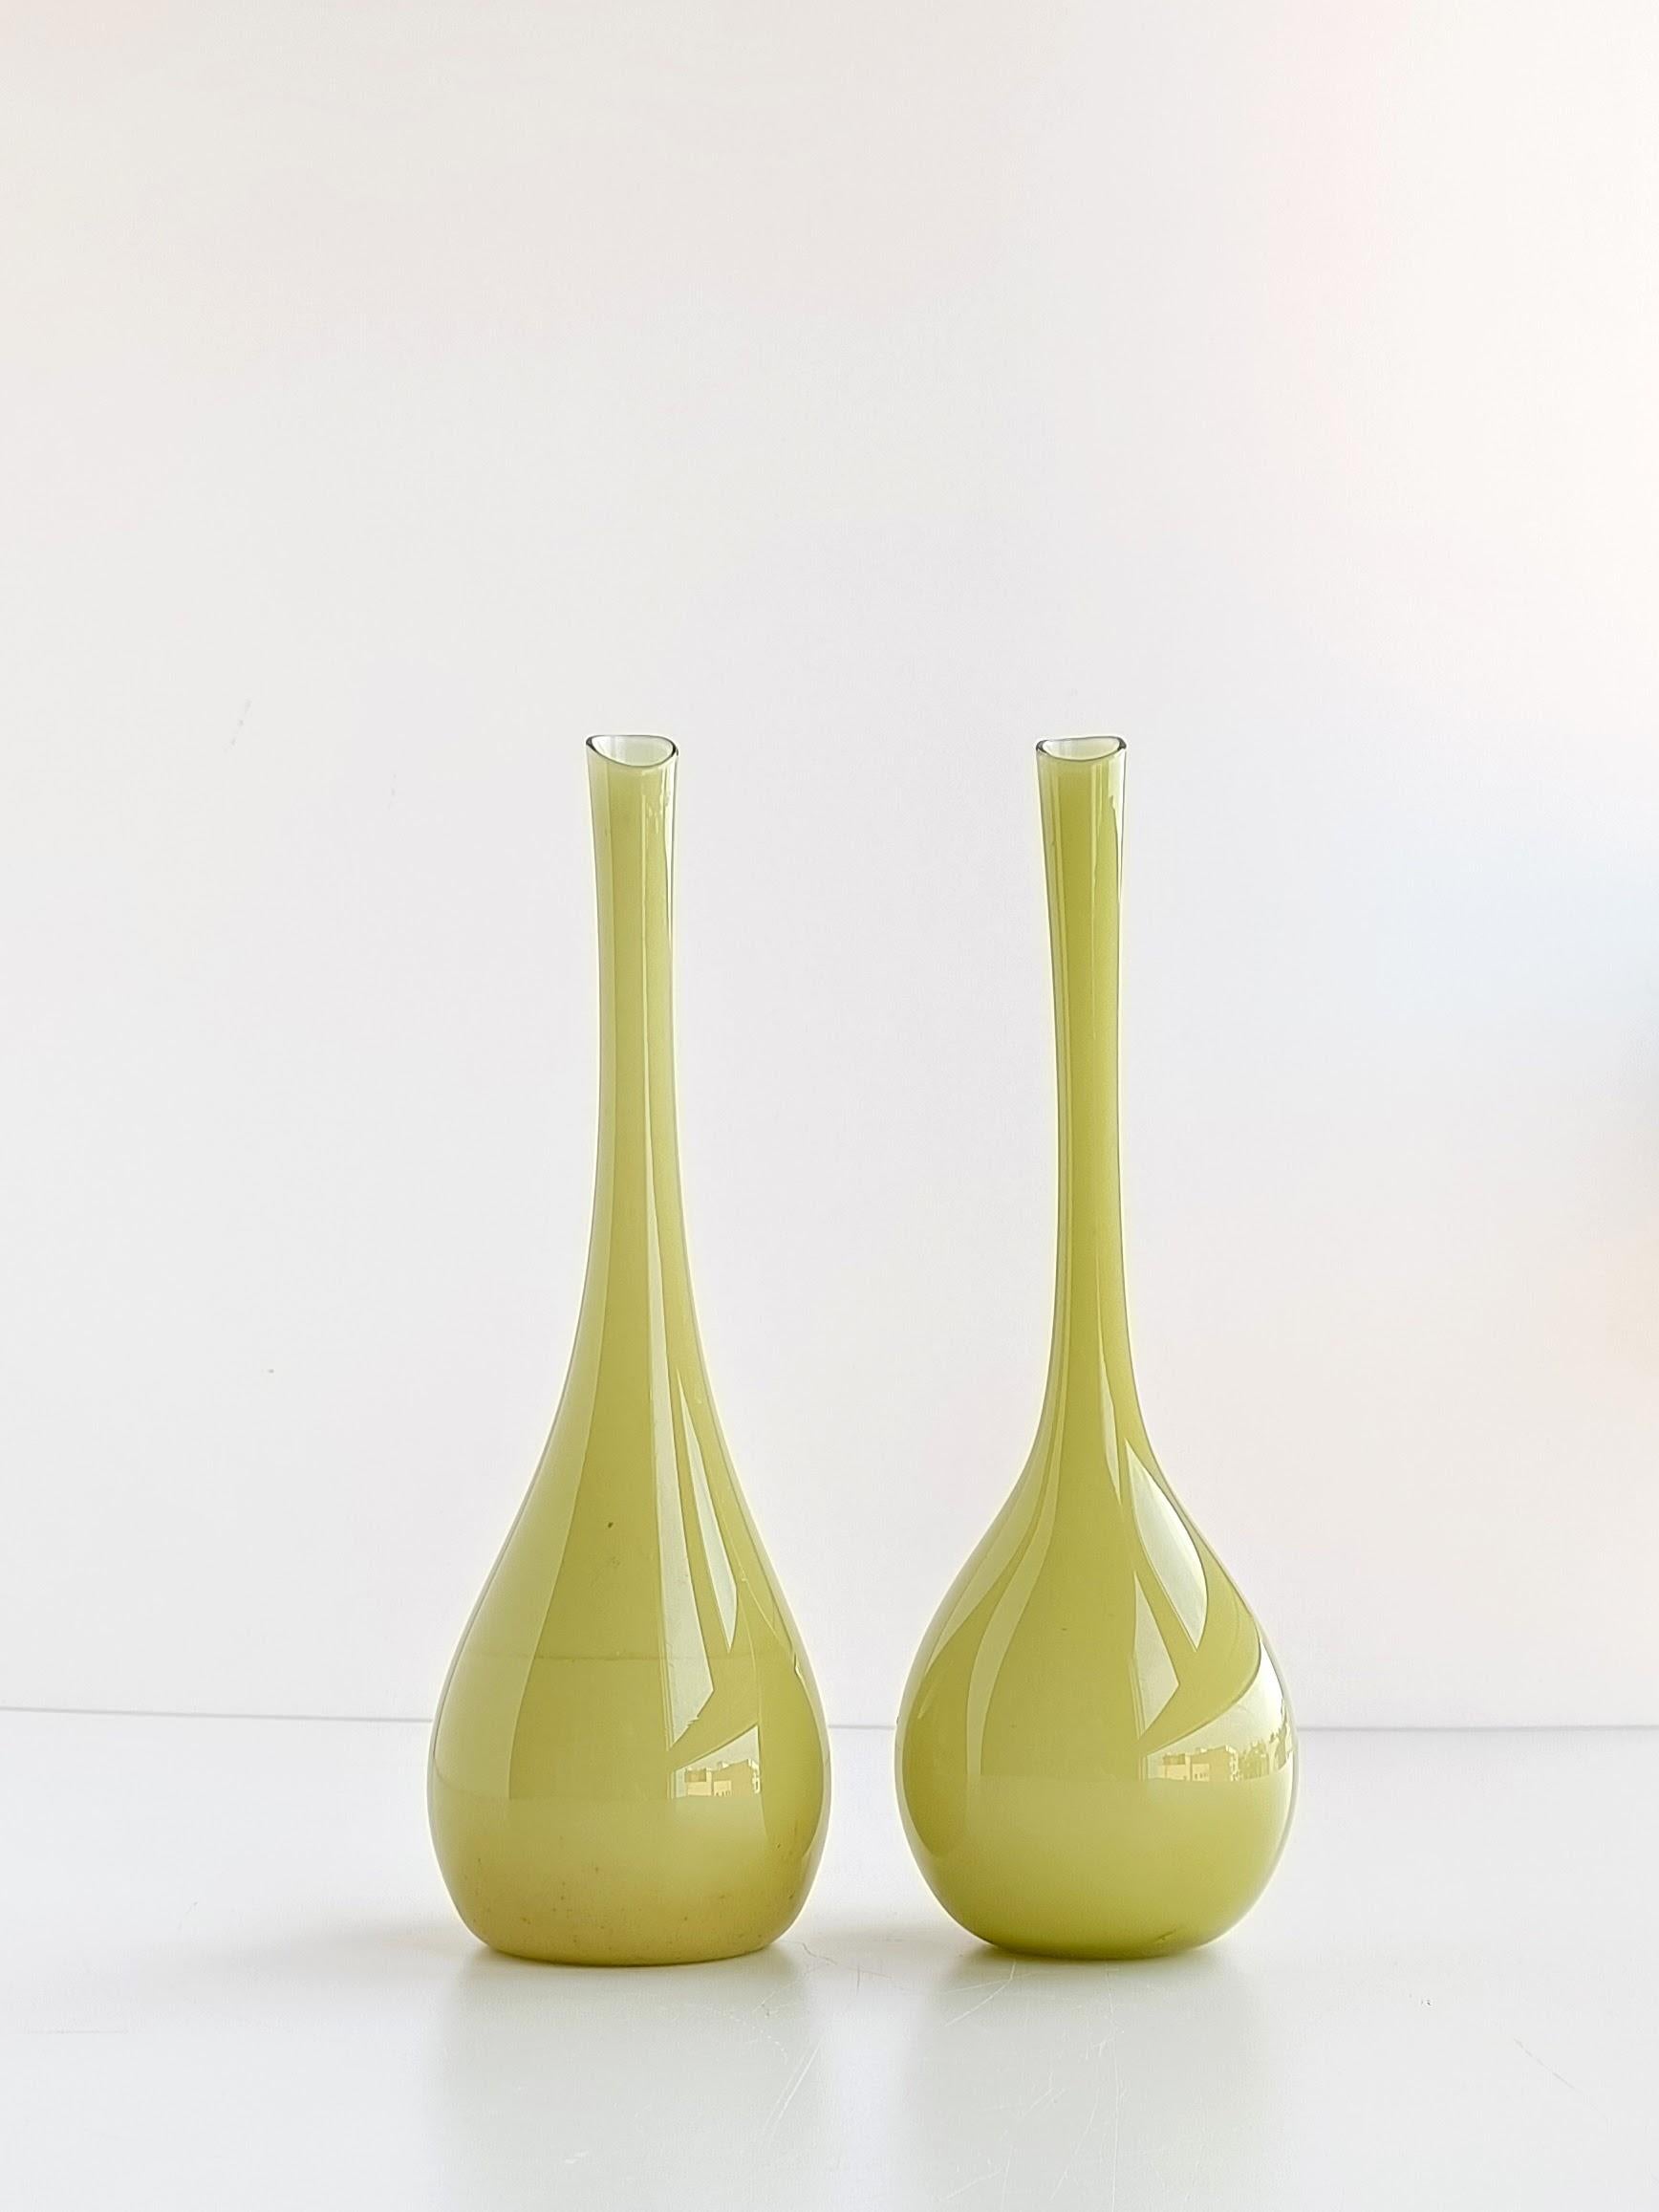 Scandinavian Modern by Gunnar Ander for Lindshammar Pair of Glass Vases, 1950s For Sale 1